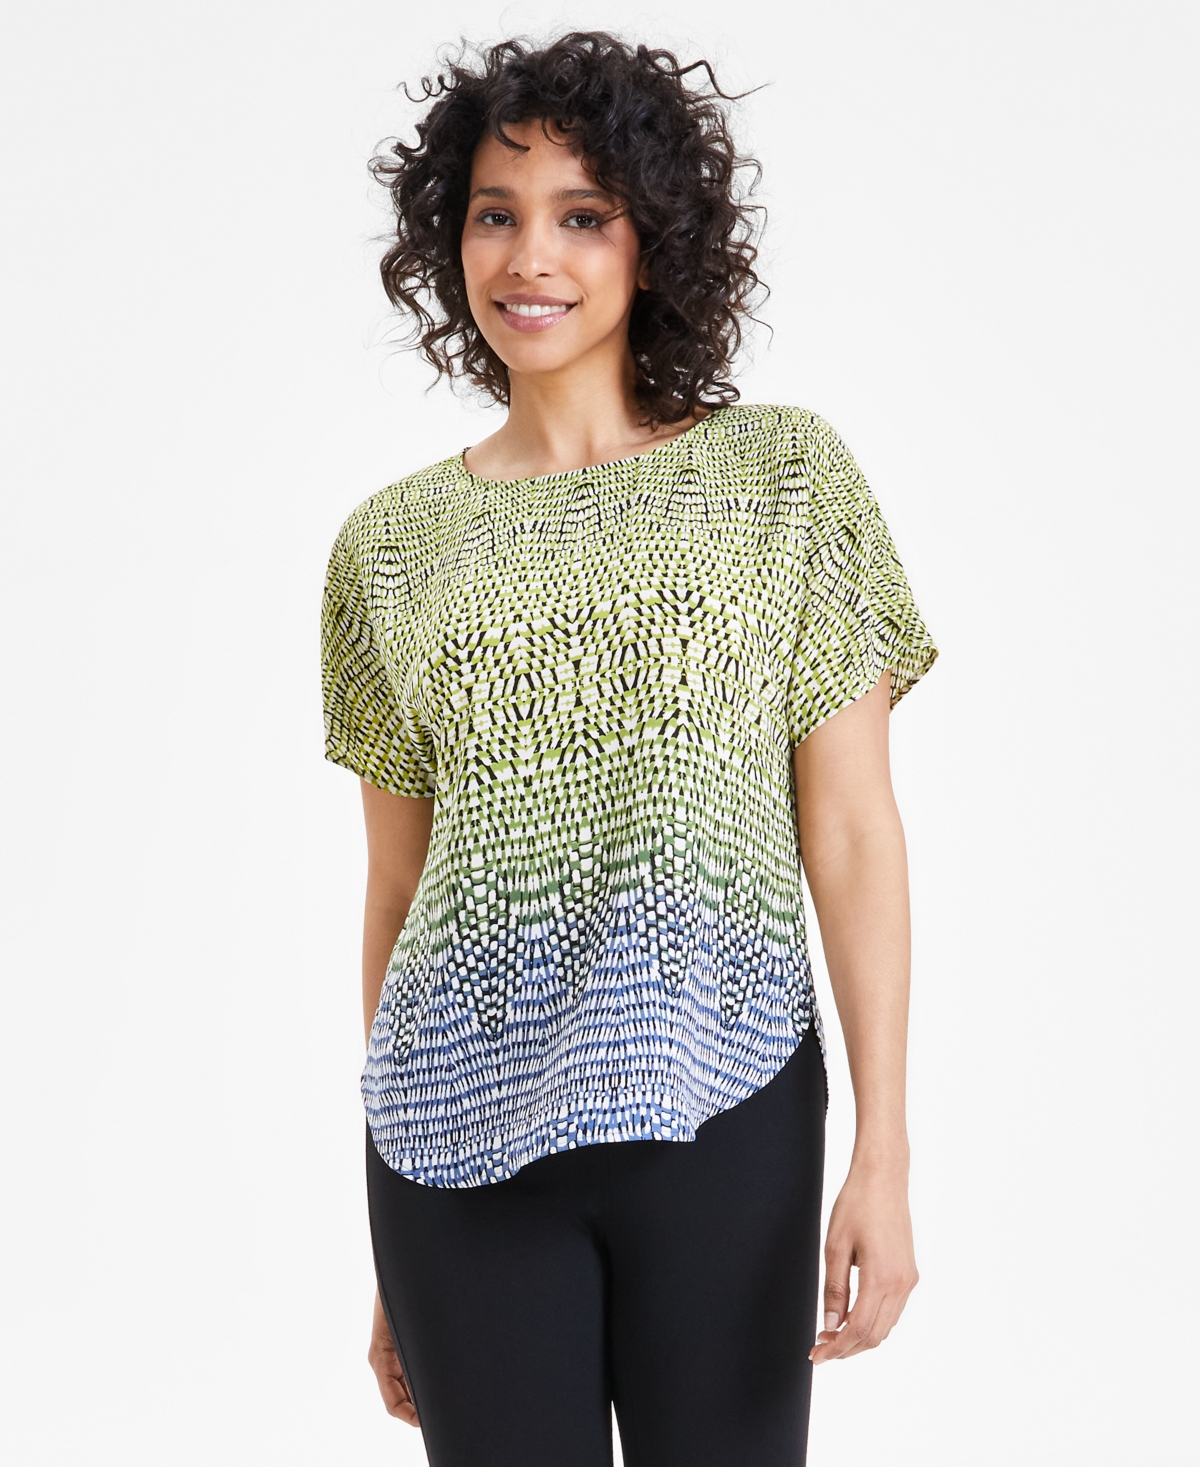 Women's Printed Short-Sleeve Ombre Blouse - Blue Jay/Anne Black